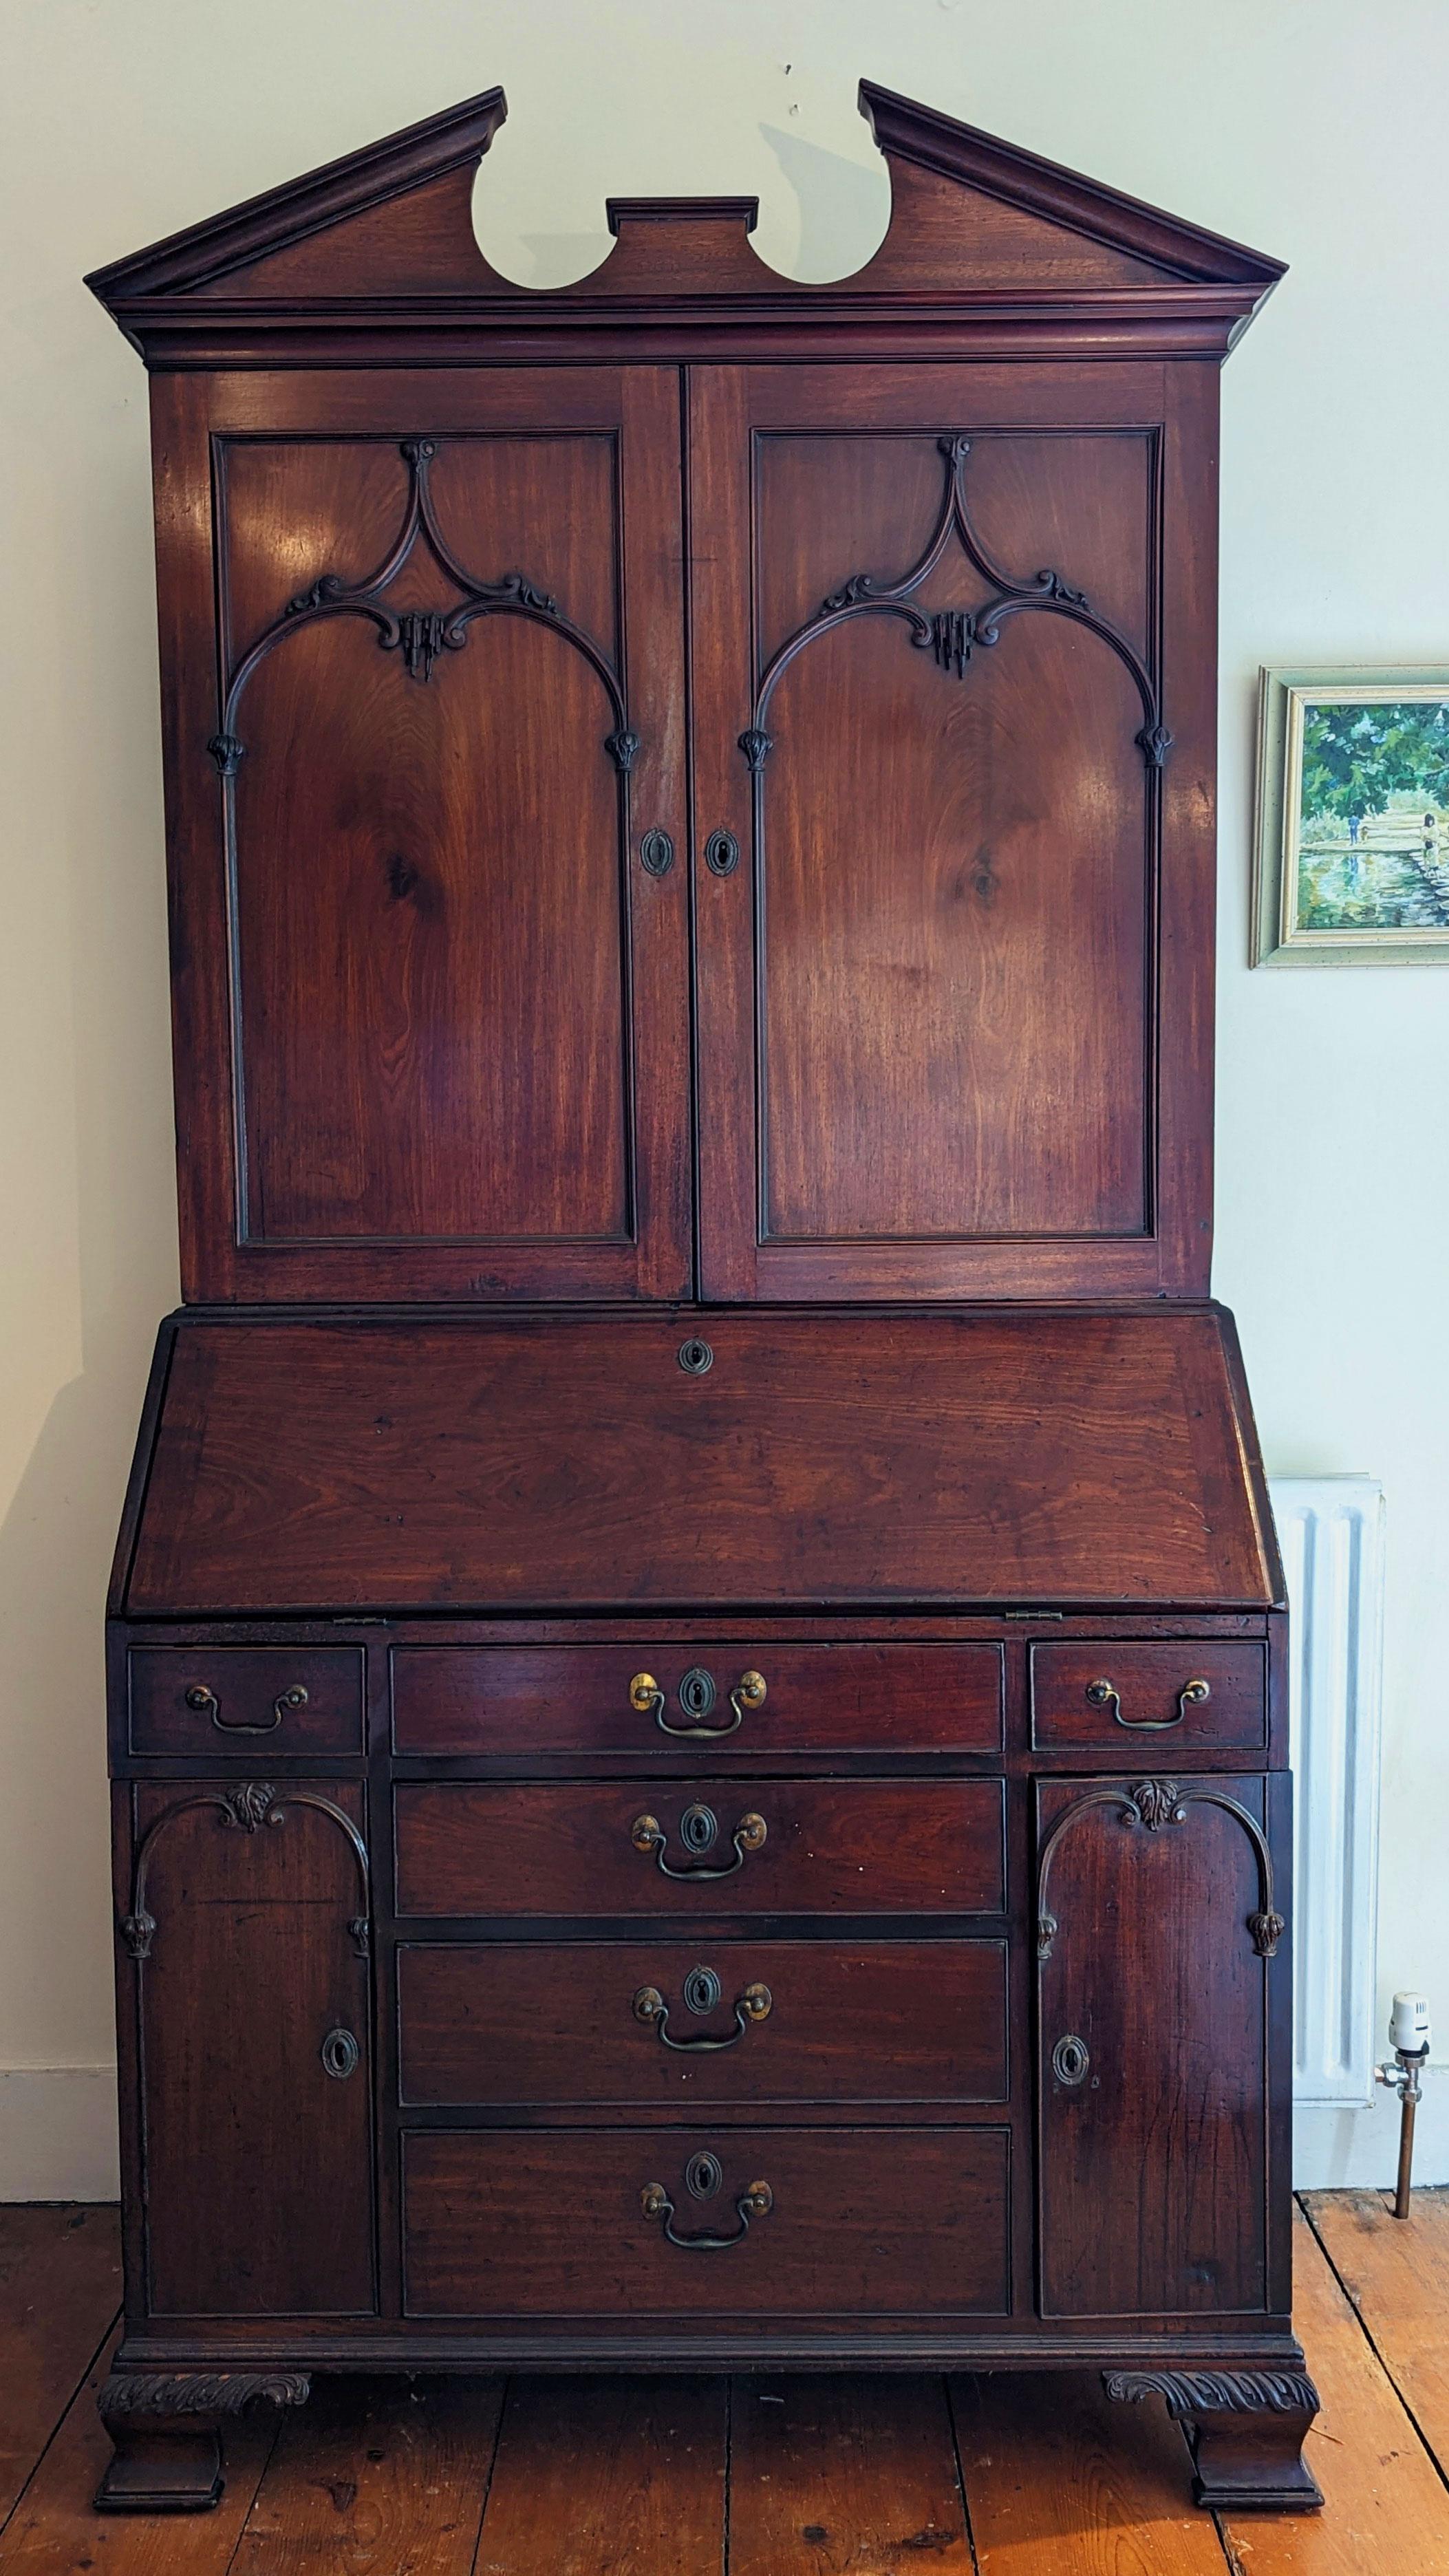 An unusual and possibly unique example of a Chippendale design for a carved mahogany bureau bookcase. 

See included photos of scans of the designs from Chippendale’s - The Gentleman and Cabinet-Makers Director. Ref CV111 Desk and Bookcase.

This